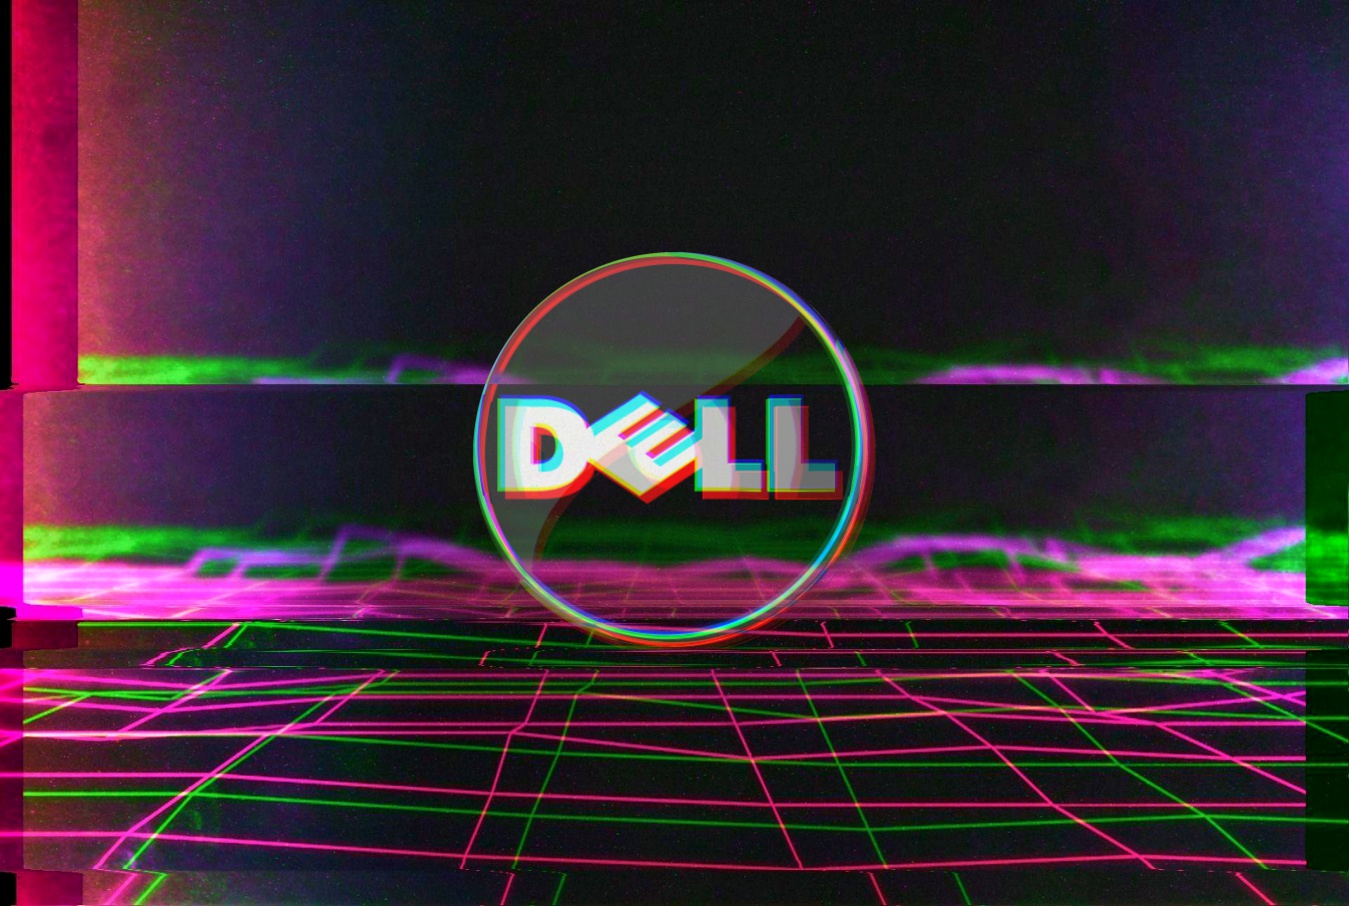 Dell resets all customer passwords after security breach